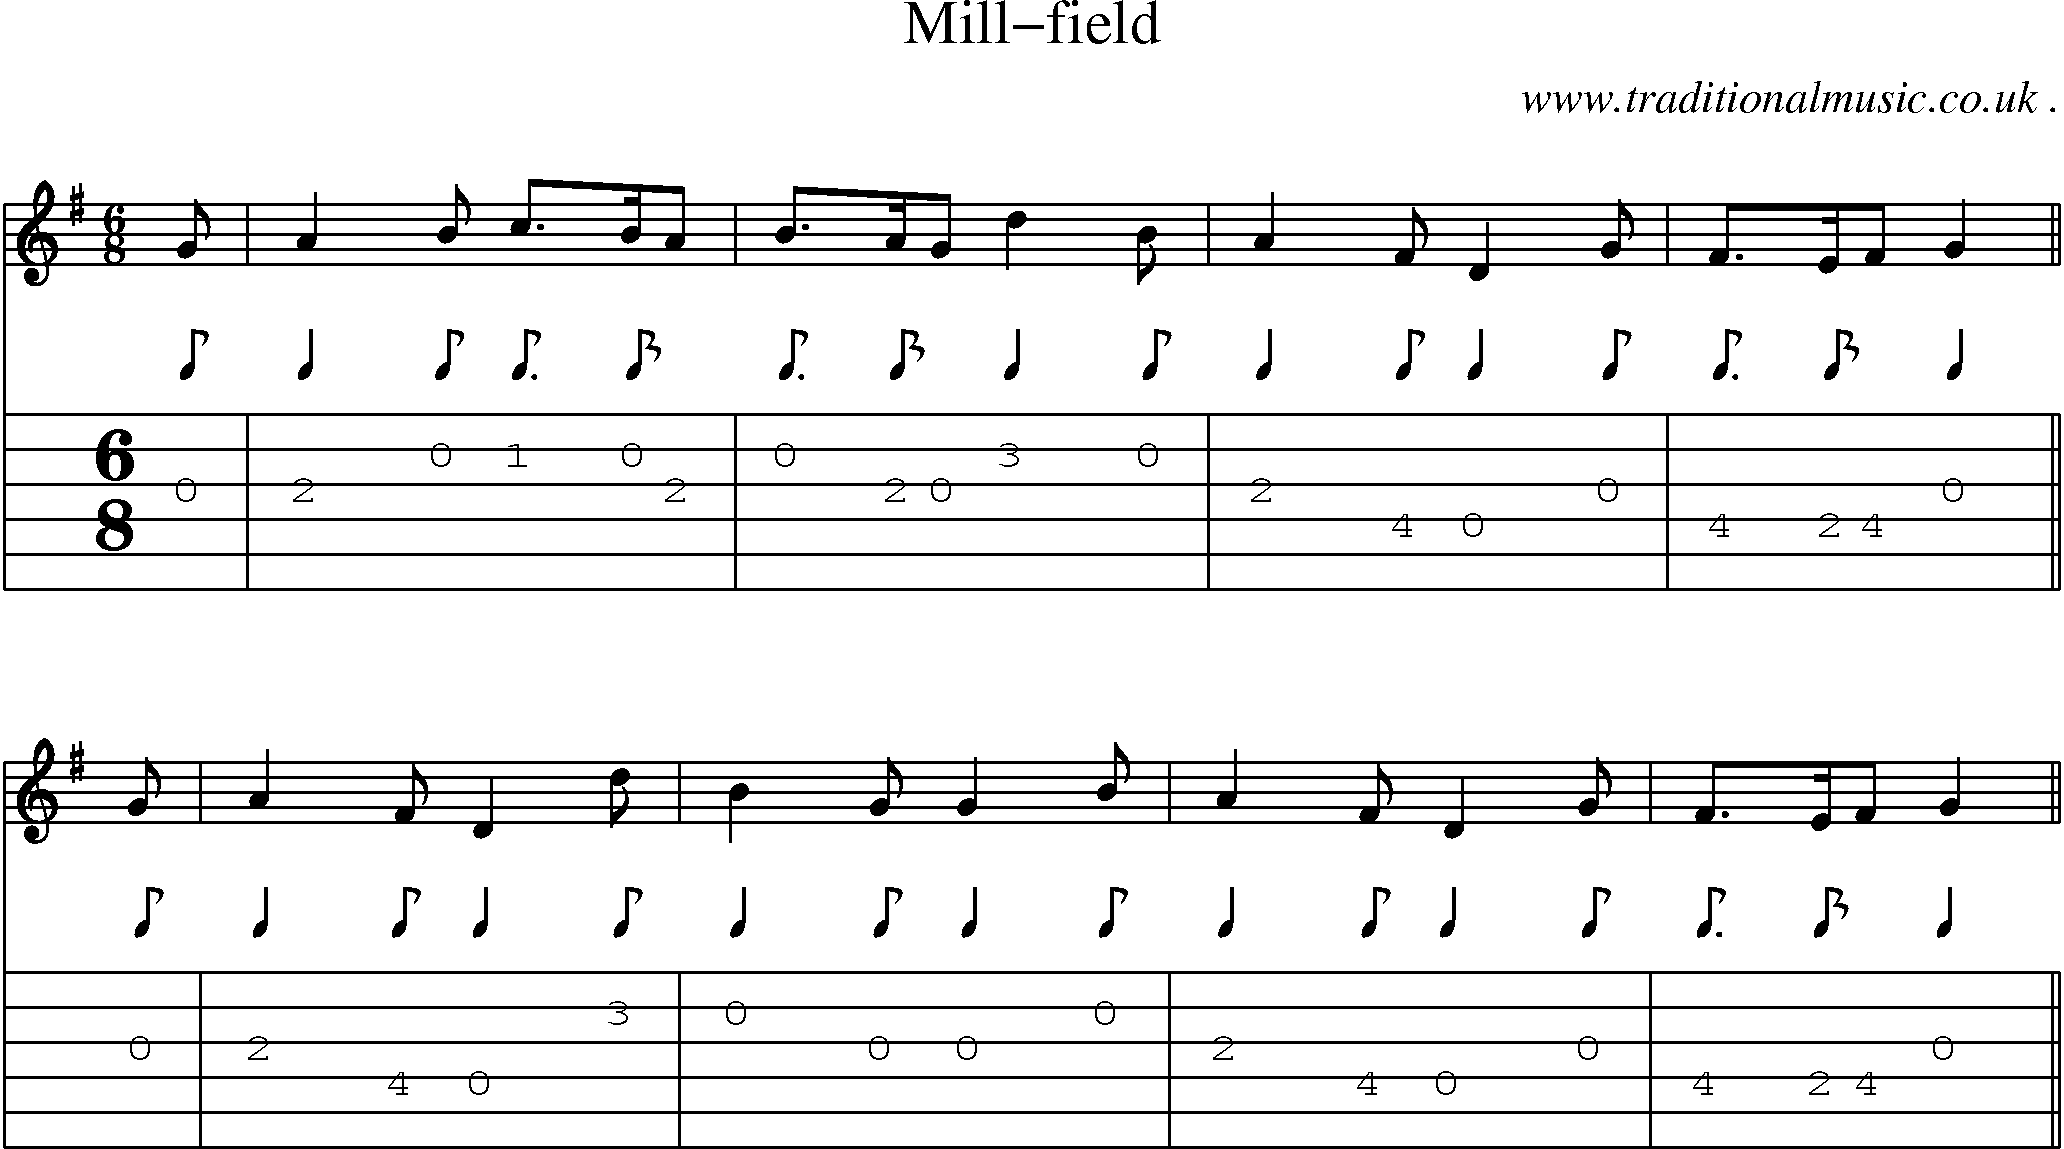 Sheet-music  score, Chords and Guitar Tabs for Mill-field